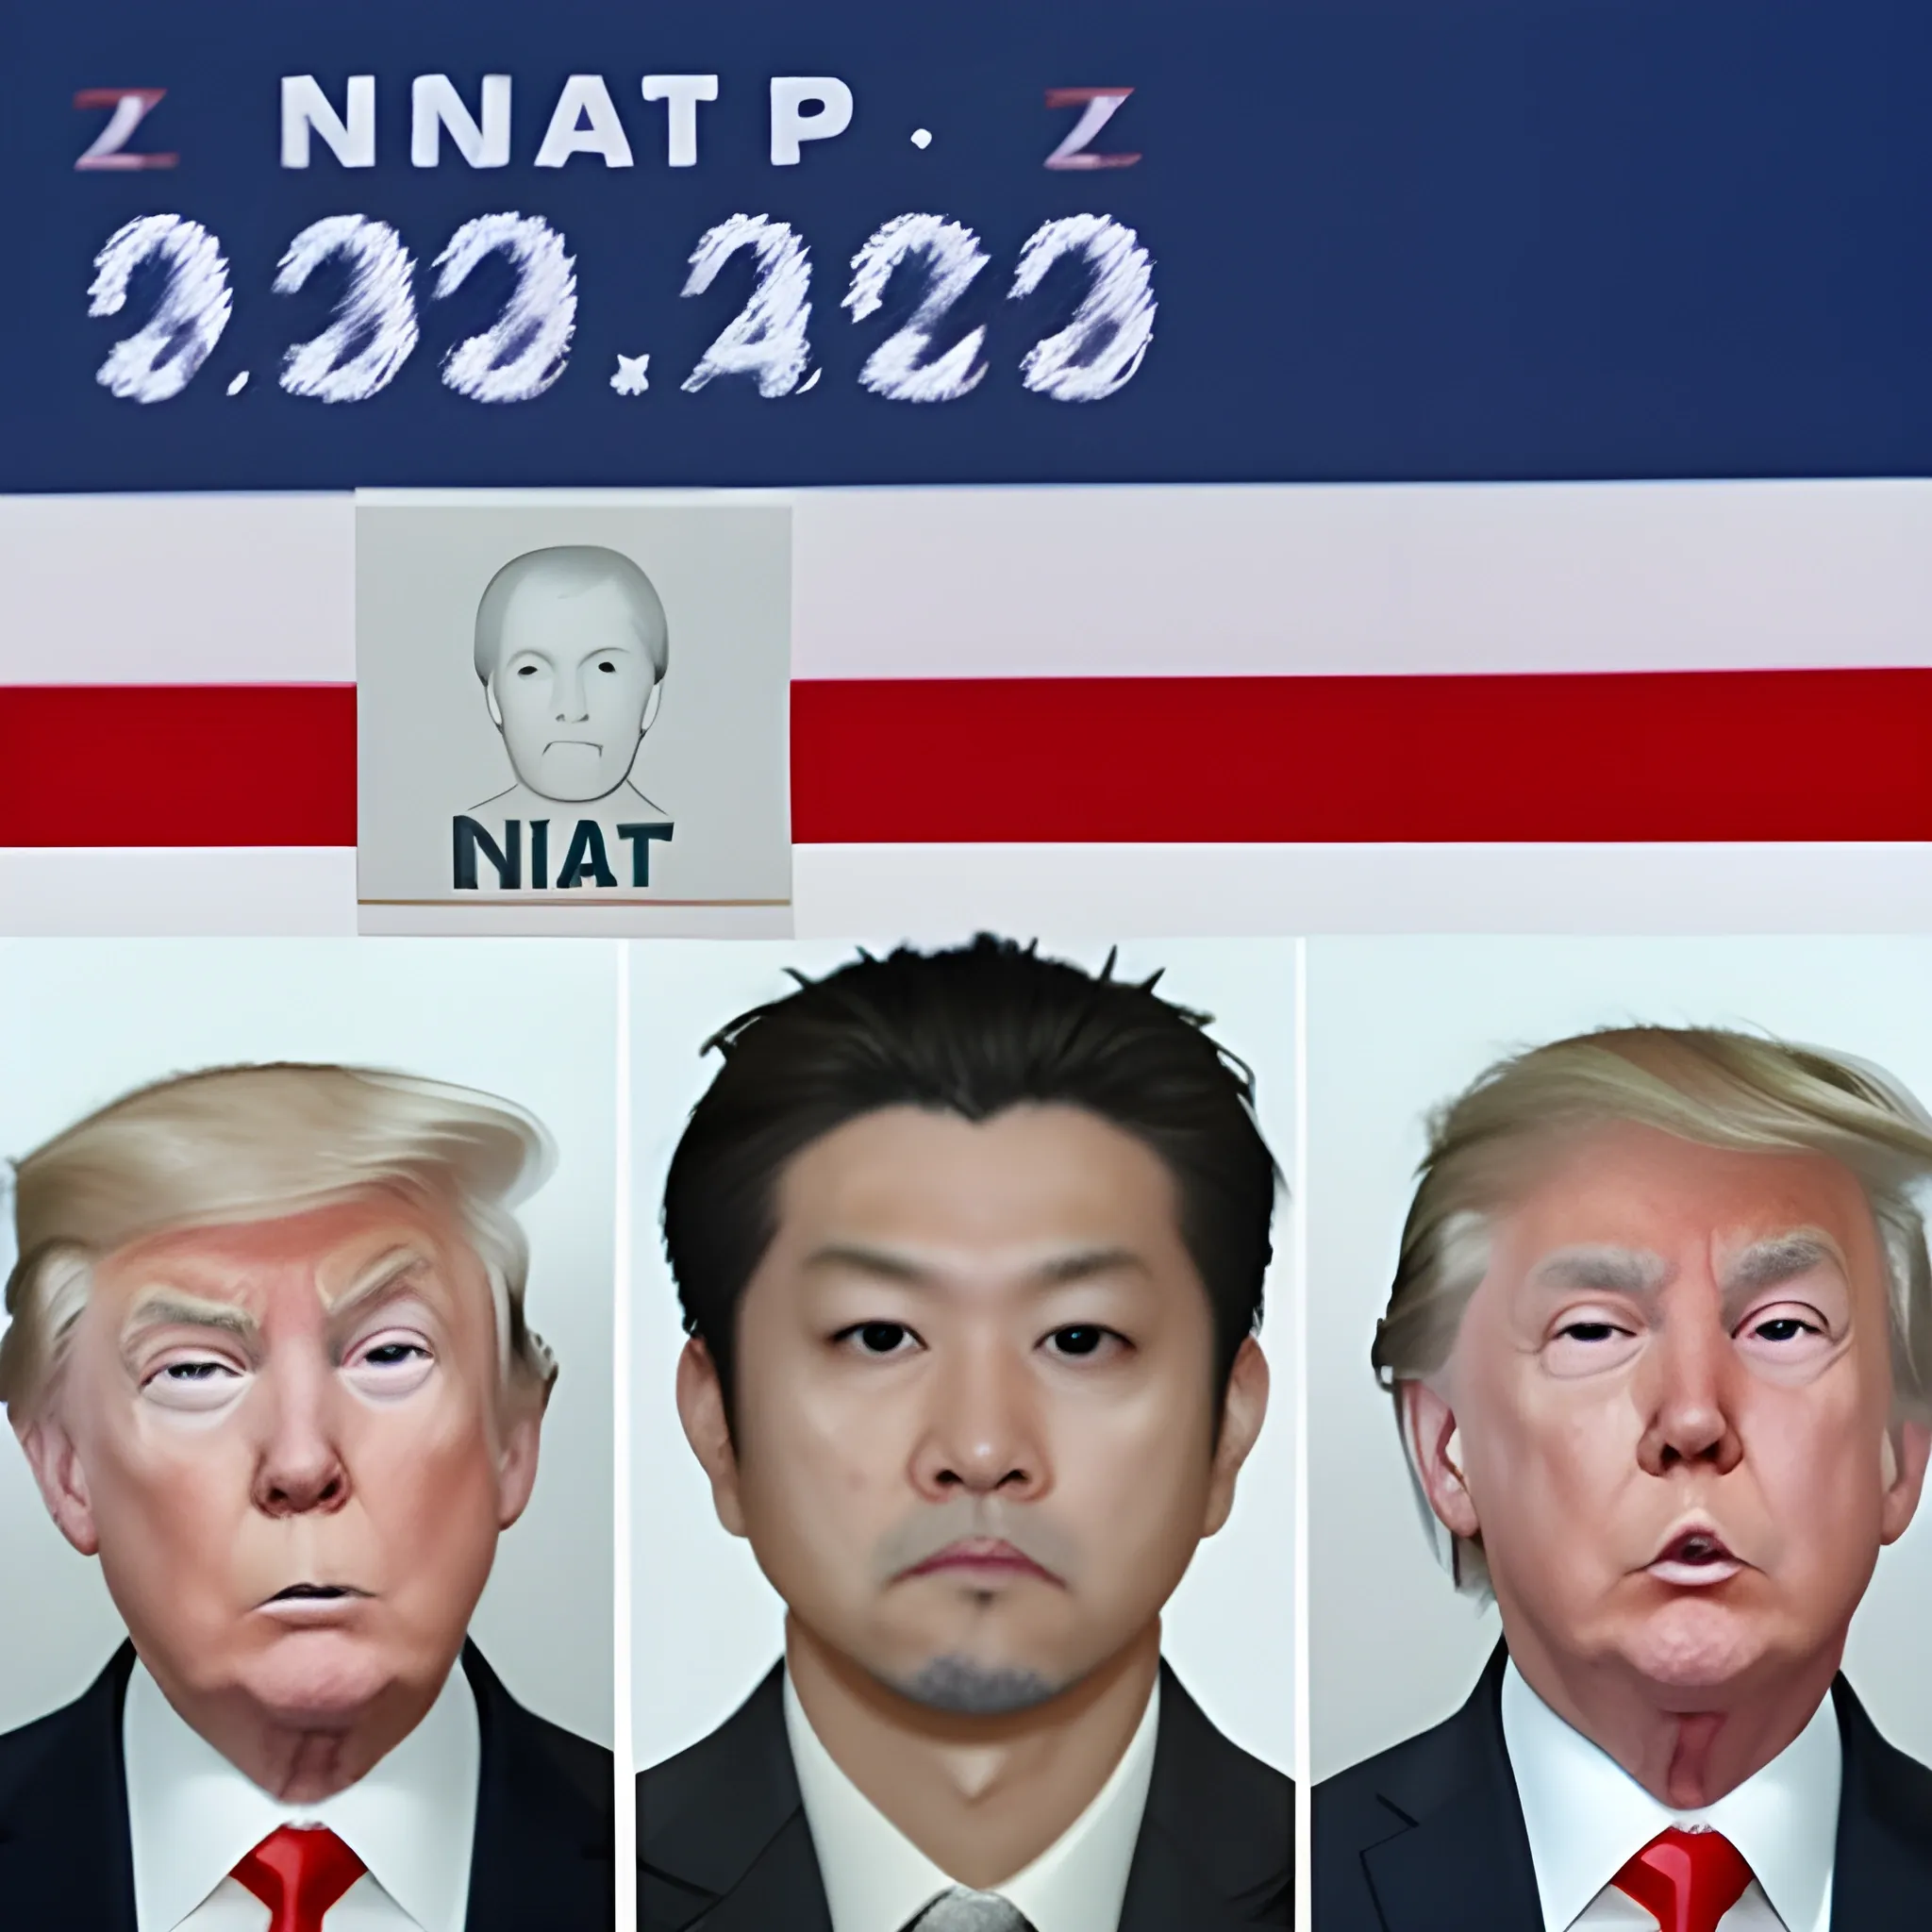 Replace Trump's face in viral G7 photo with his mugshot